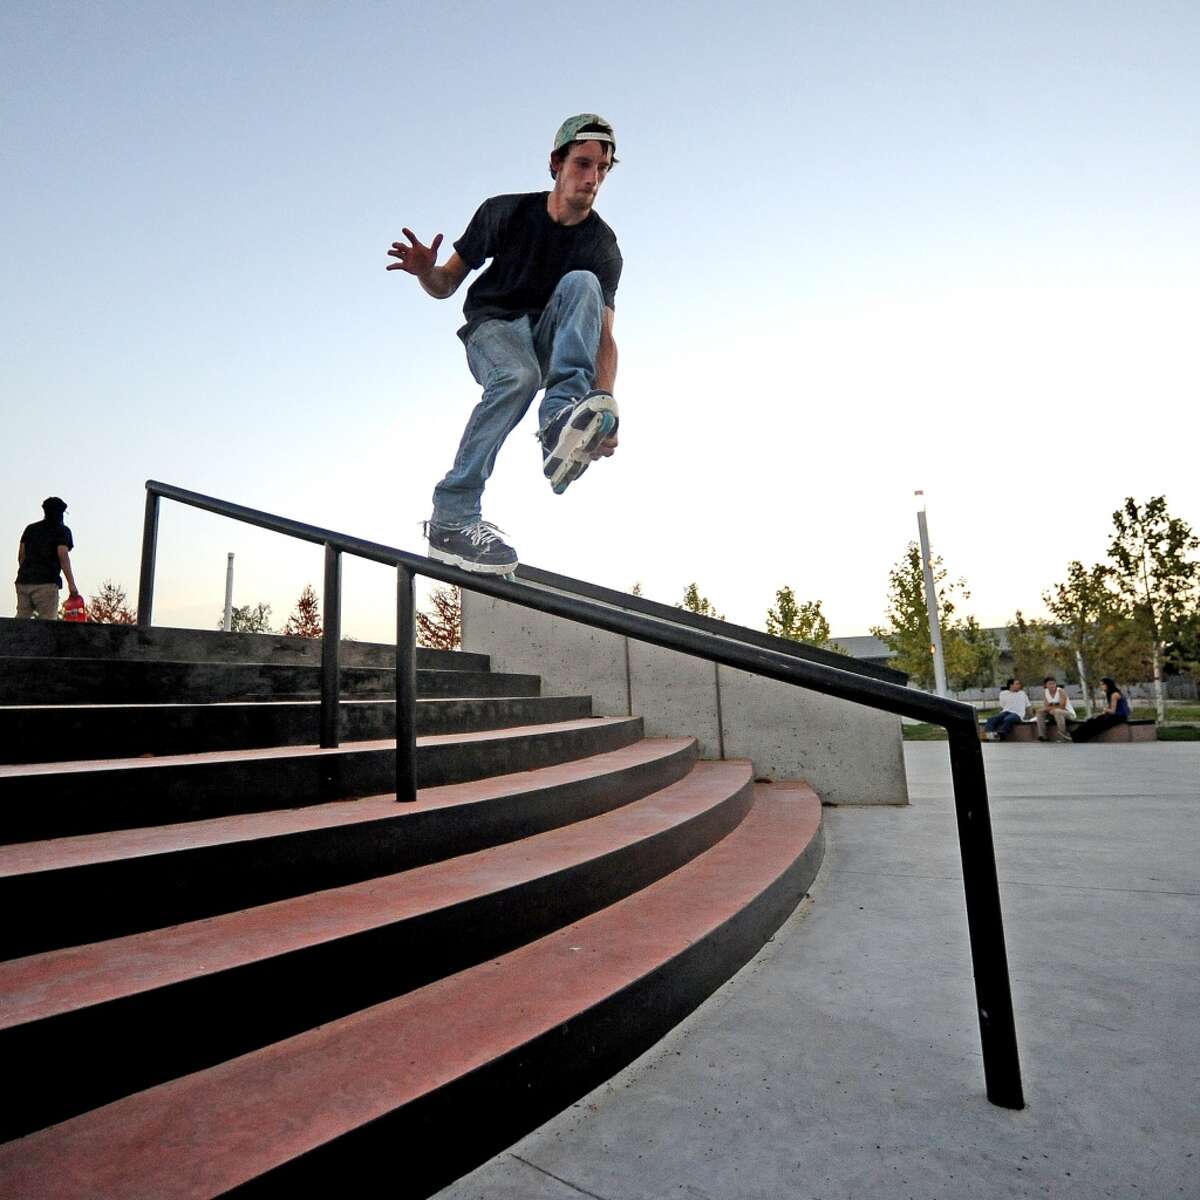 Local comedian Jack Neil lands a grabbed makio down the handrail at the Beautiful Mountain Skate Plaza on Tuesday, August 6, 2013. Photo taken: Randy Edwards/The Enterprise